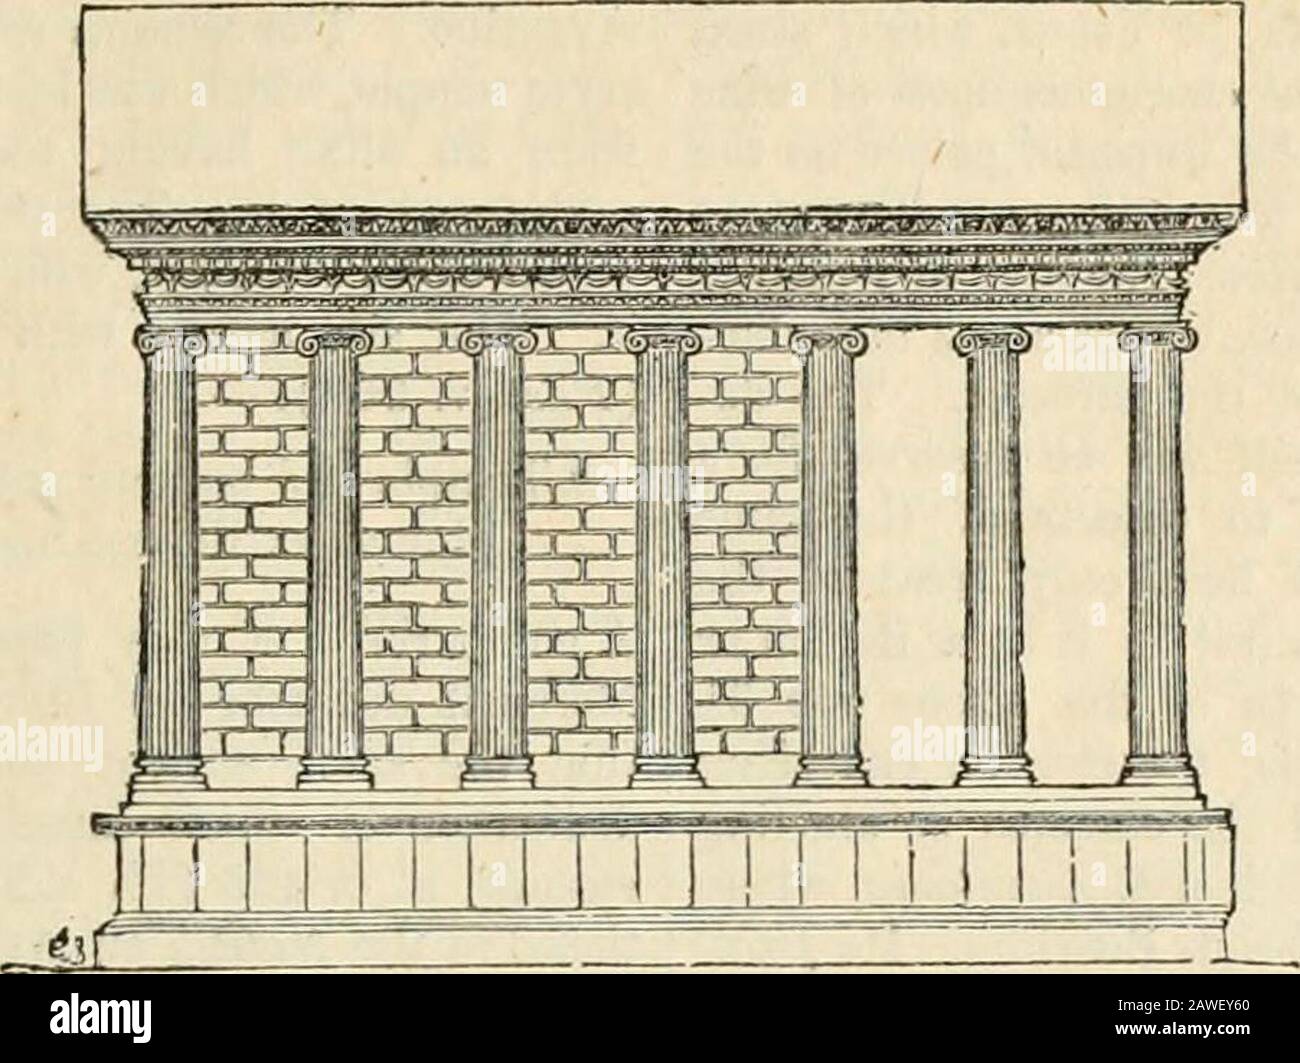 Dictionary of Greek and Roman geography . for that assumption seem to be itsvicinity to the supposed temple of Fortuna Virilis.Livys description (xxxiii. 27) of the two triumphalarches erected in the Foram Boarium before the twotemples appearing to indicate that they lay closetogether. With regard to the probability of this little church ROJIA. having been the temp7e of Pudicitia Patricia, itmight be objected that there was in fact no suchtemple, and that we are to assume only a statuewith an altar (Sachse, Gesch. d. S.Rom, i. p. 365).Yet, as Becker remarks {Handh. p. 480, note 100),Livy himse Stock Photo